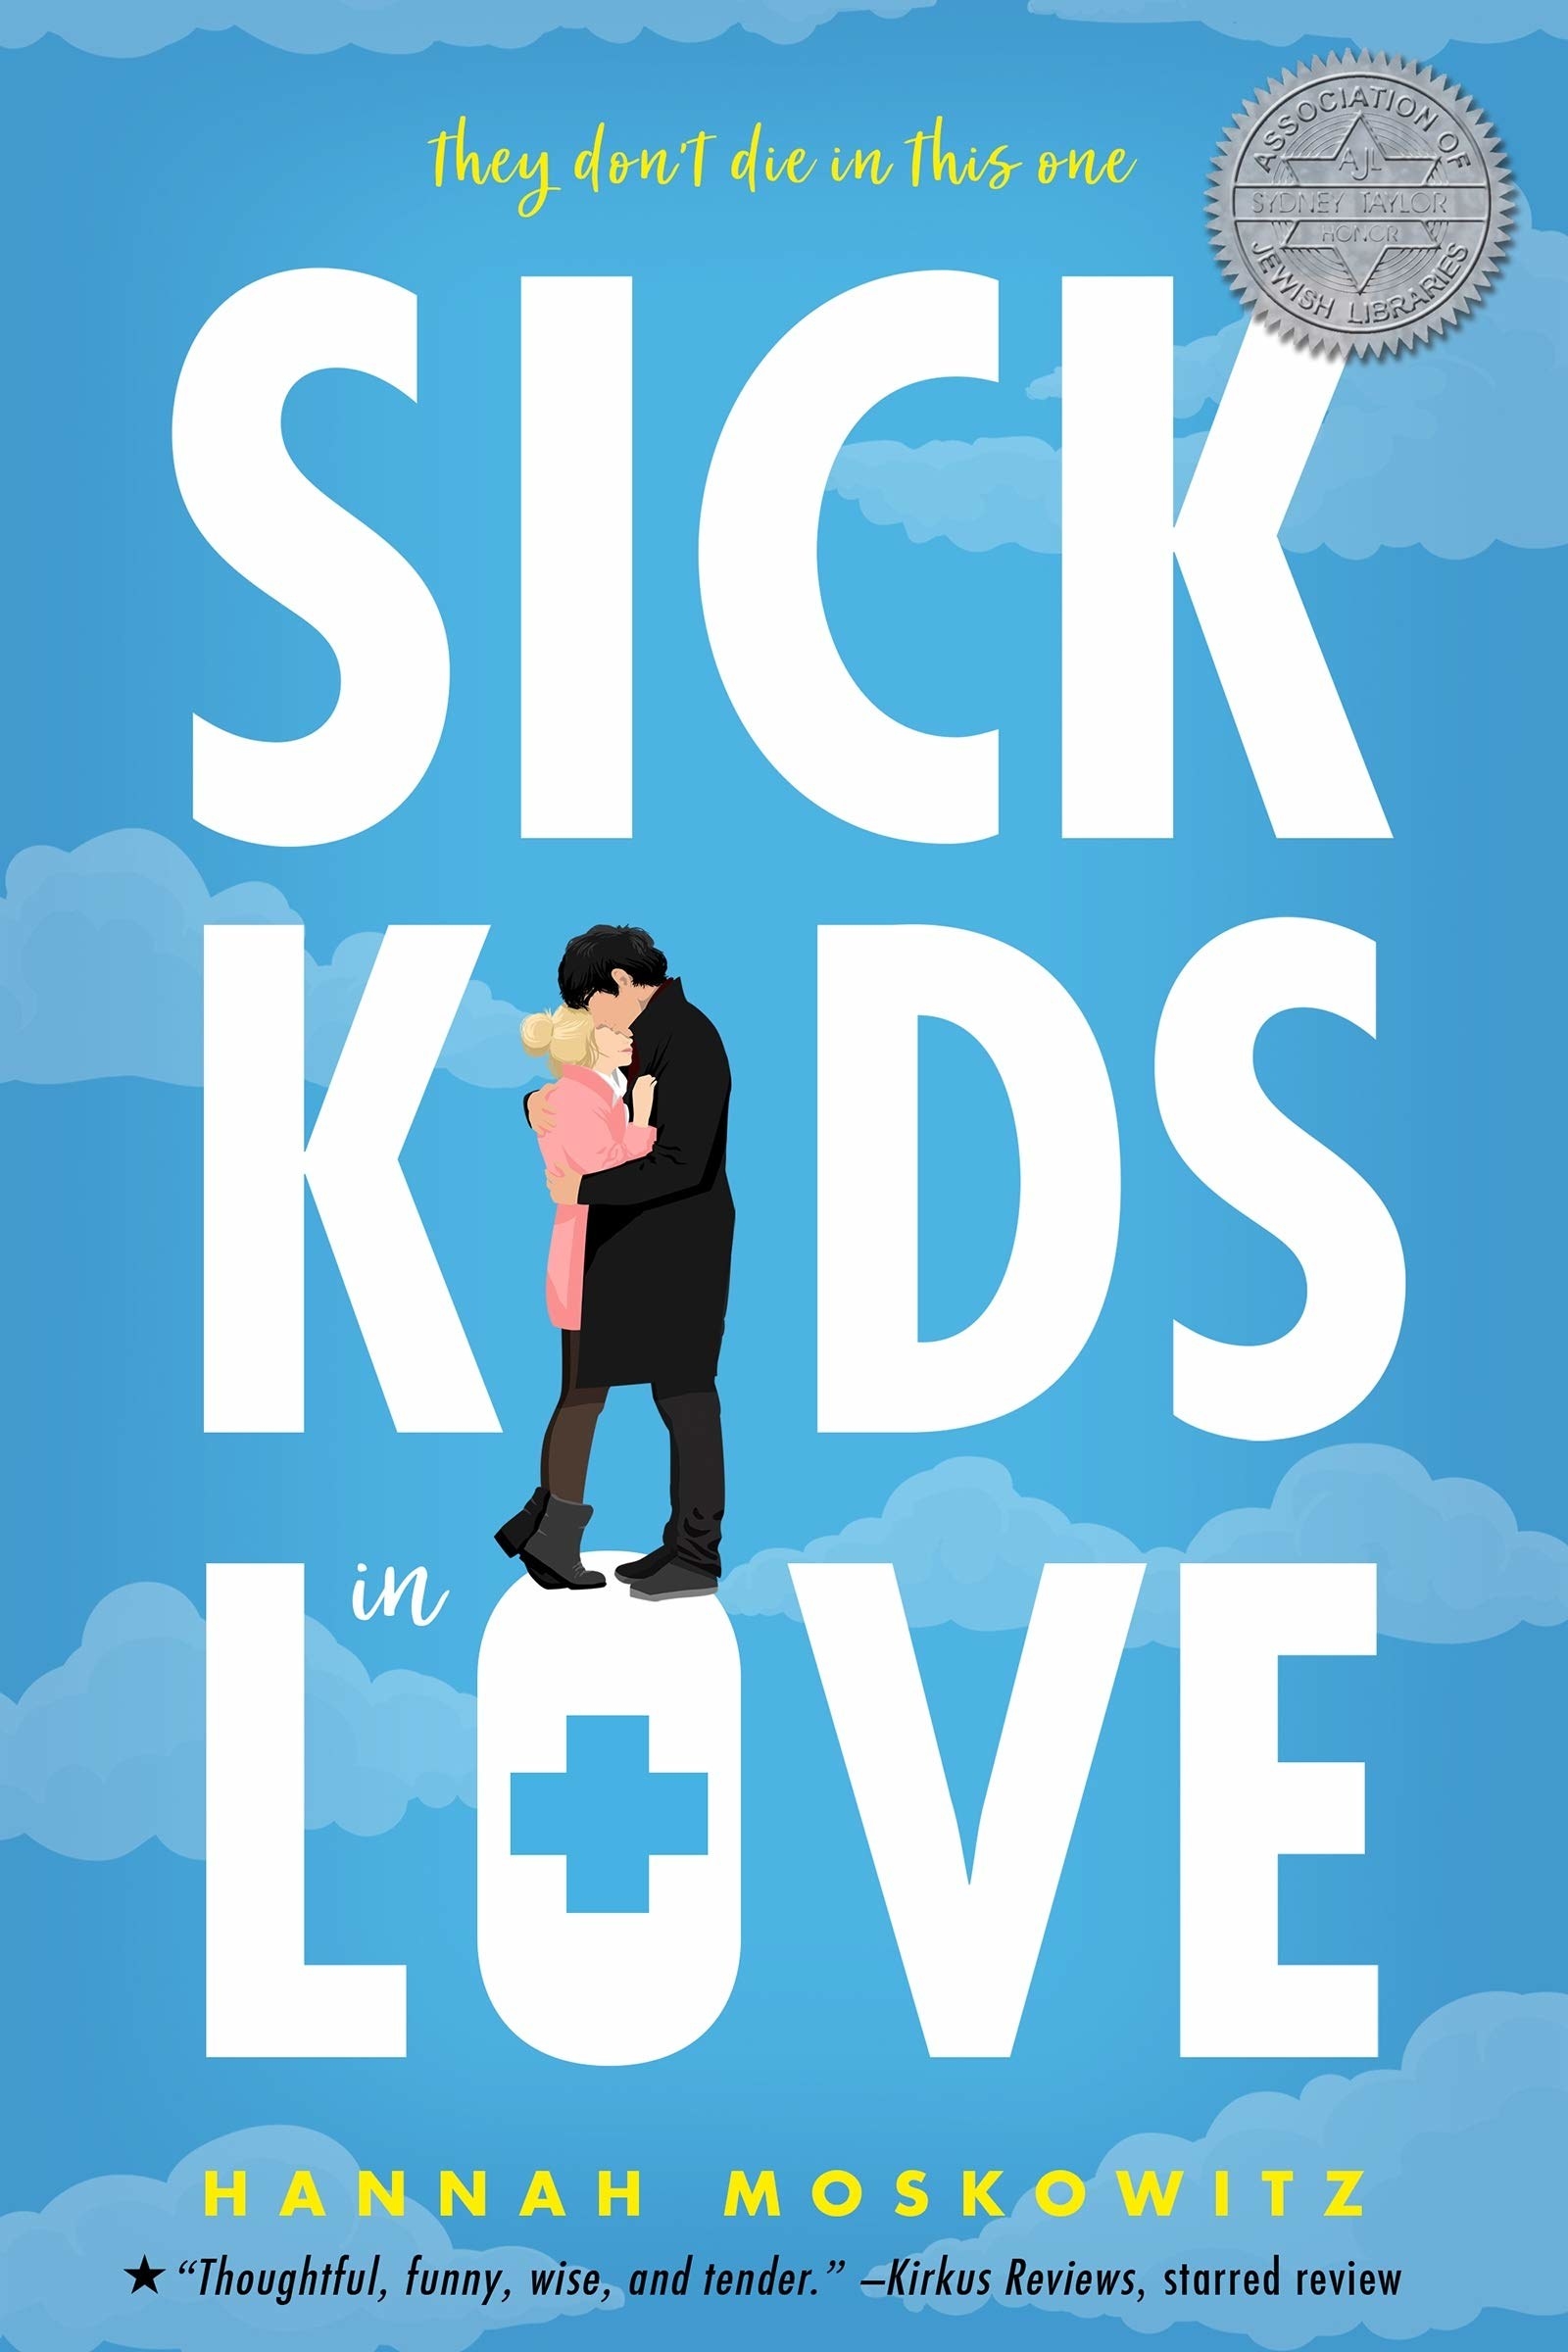 Blue cover with light blue clouds. Title reads: Sick Kids in Love. Instead of an &quot;I&quot; there are two white teenagers, a girl in a pink coat and a boy in a black coat. Tagline reads: &quot;They don&#x27;t die in this one.&quot;